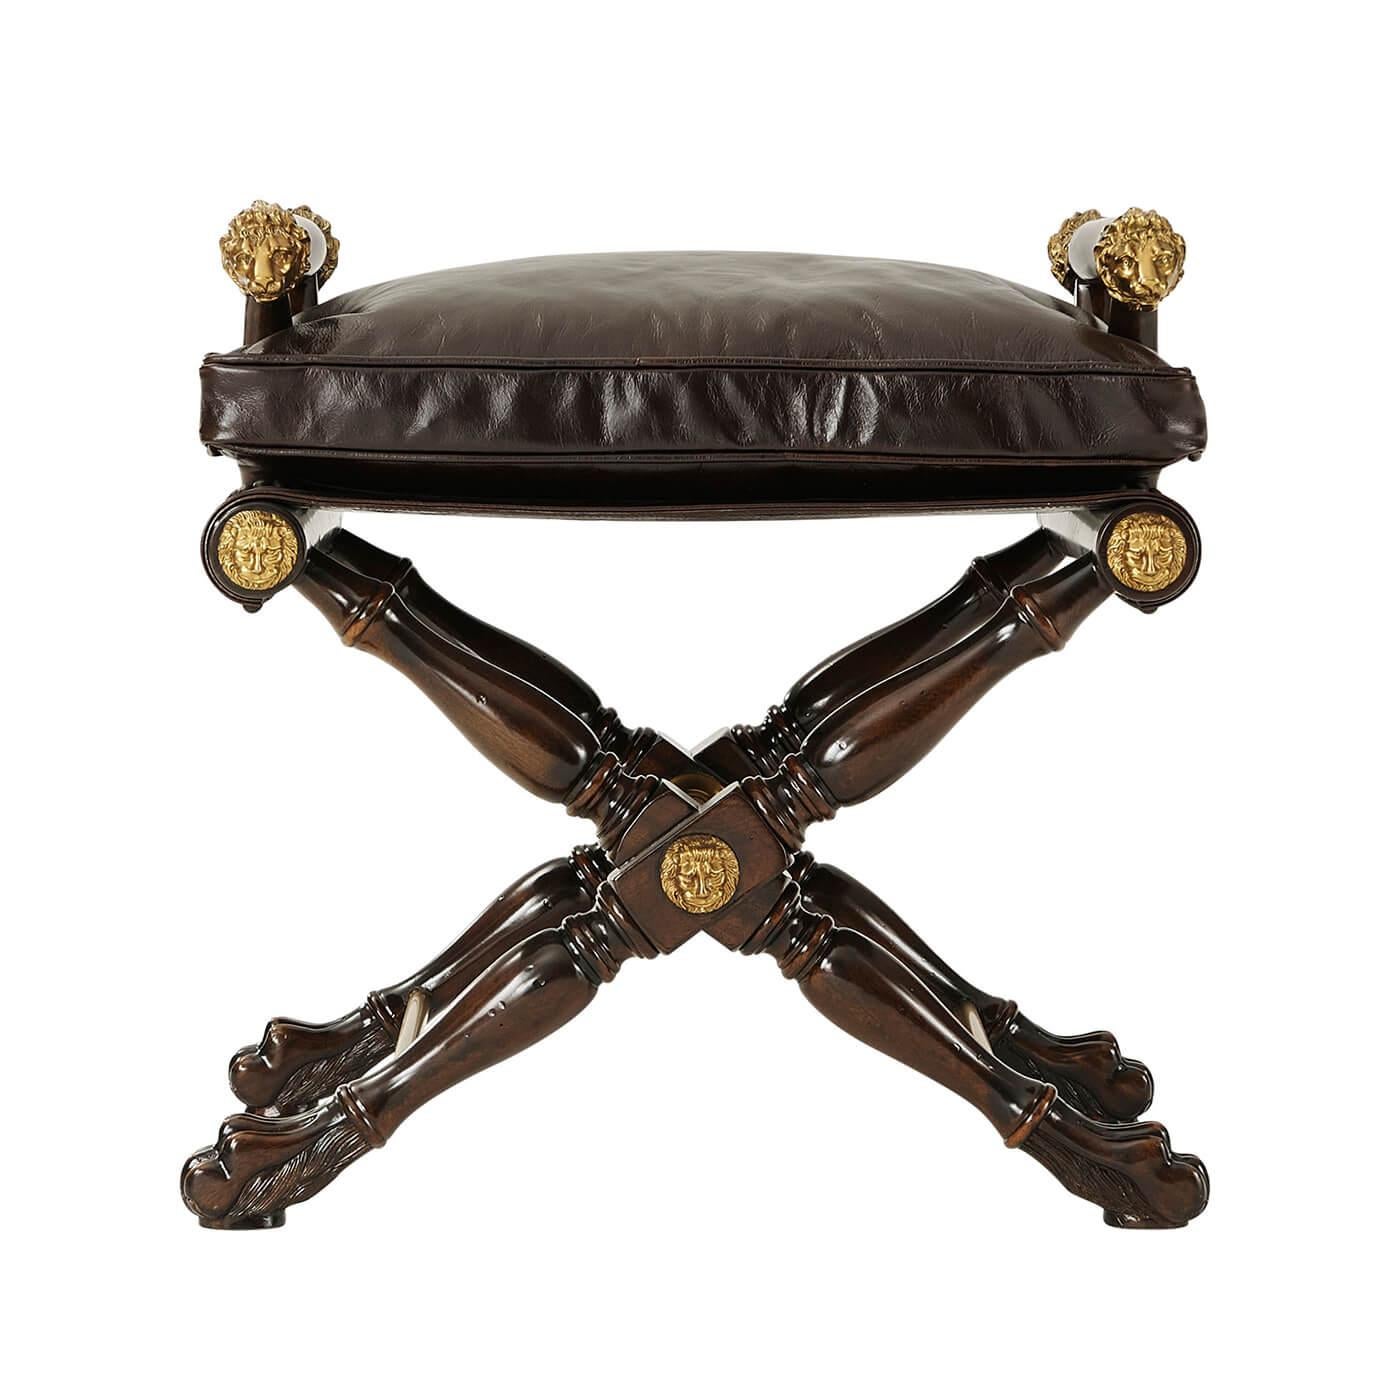 A Regency style mahogany and brass mounted stool in the manner of Thomas Hope, with slung seat, lion head arm terminals, on a turned 